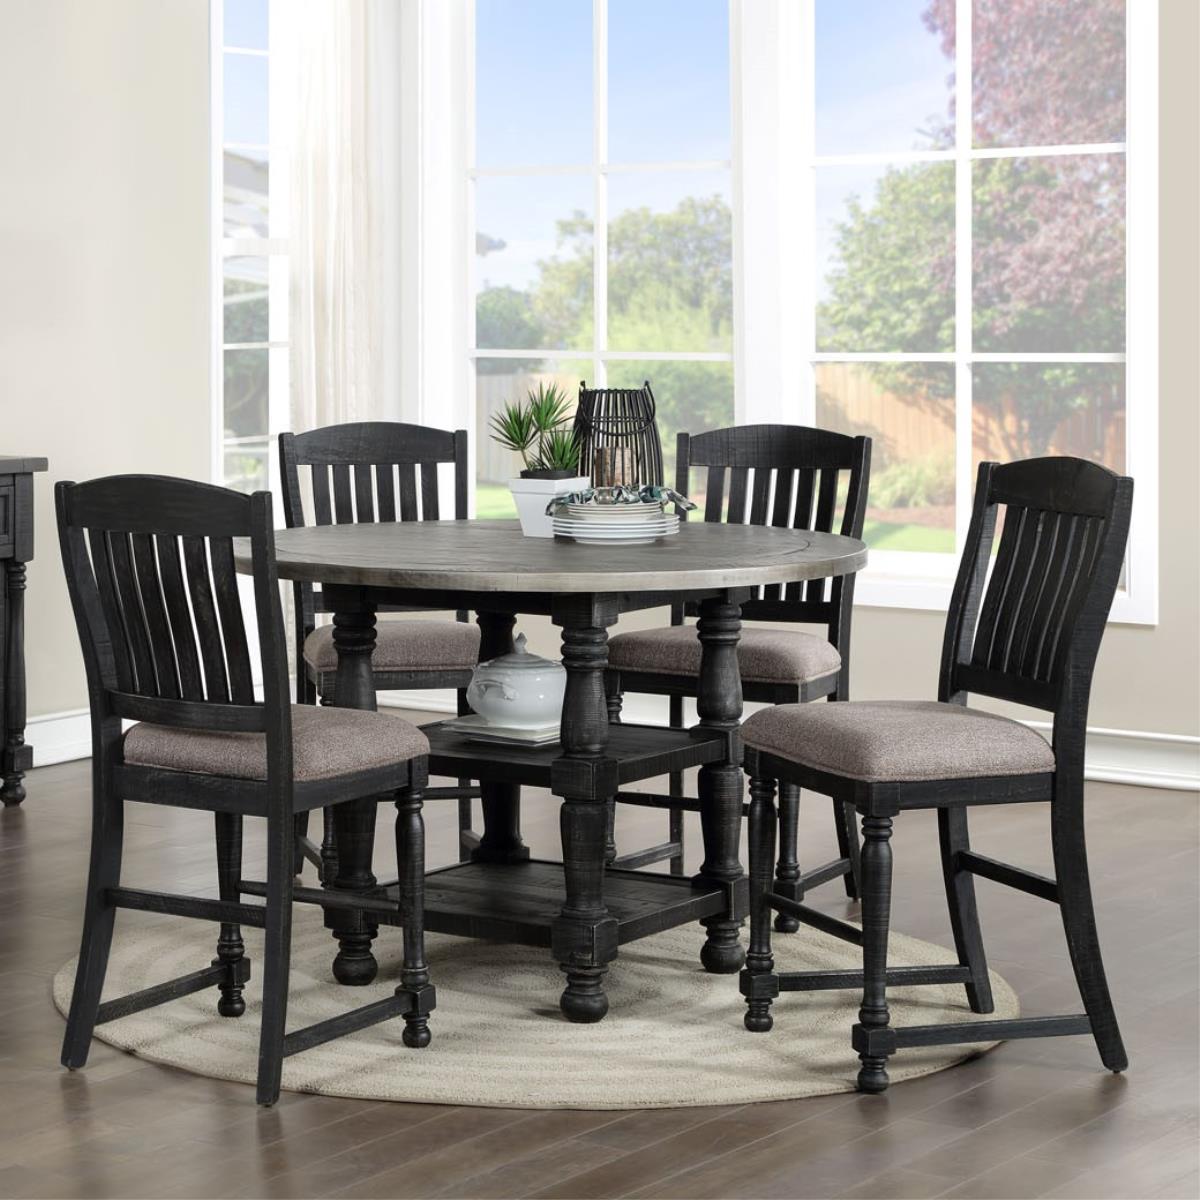 Avalon Richland Black Round Counter Table and 4 Counter Chairs